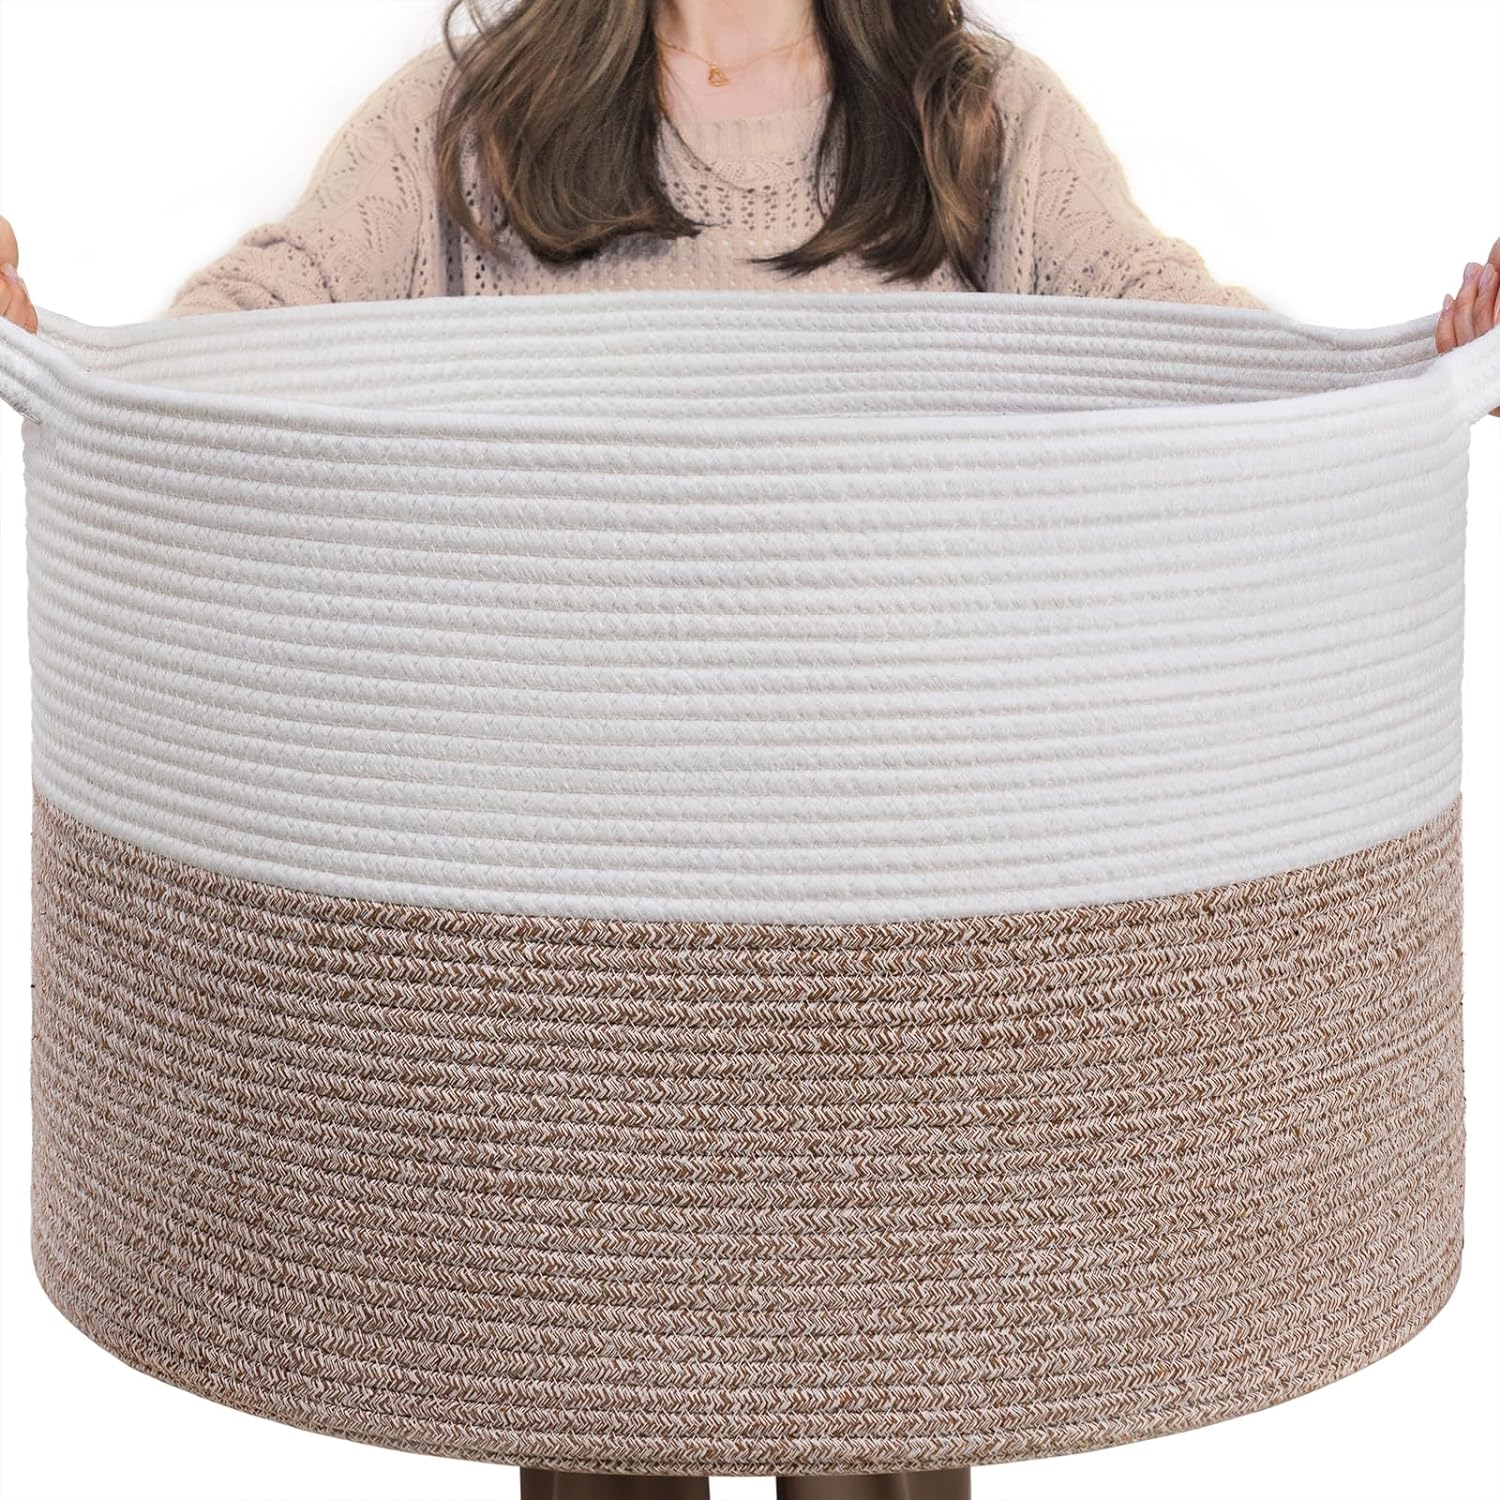  INDRESSME XXXLarge Cotton Rope Basket 21.7 x 21.7 x 13.8 Woven Baby Laundry Blanket Basket Toy Basket with Handle Storage Comforter Cushions Thread Laundry Hamper White & Brown 